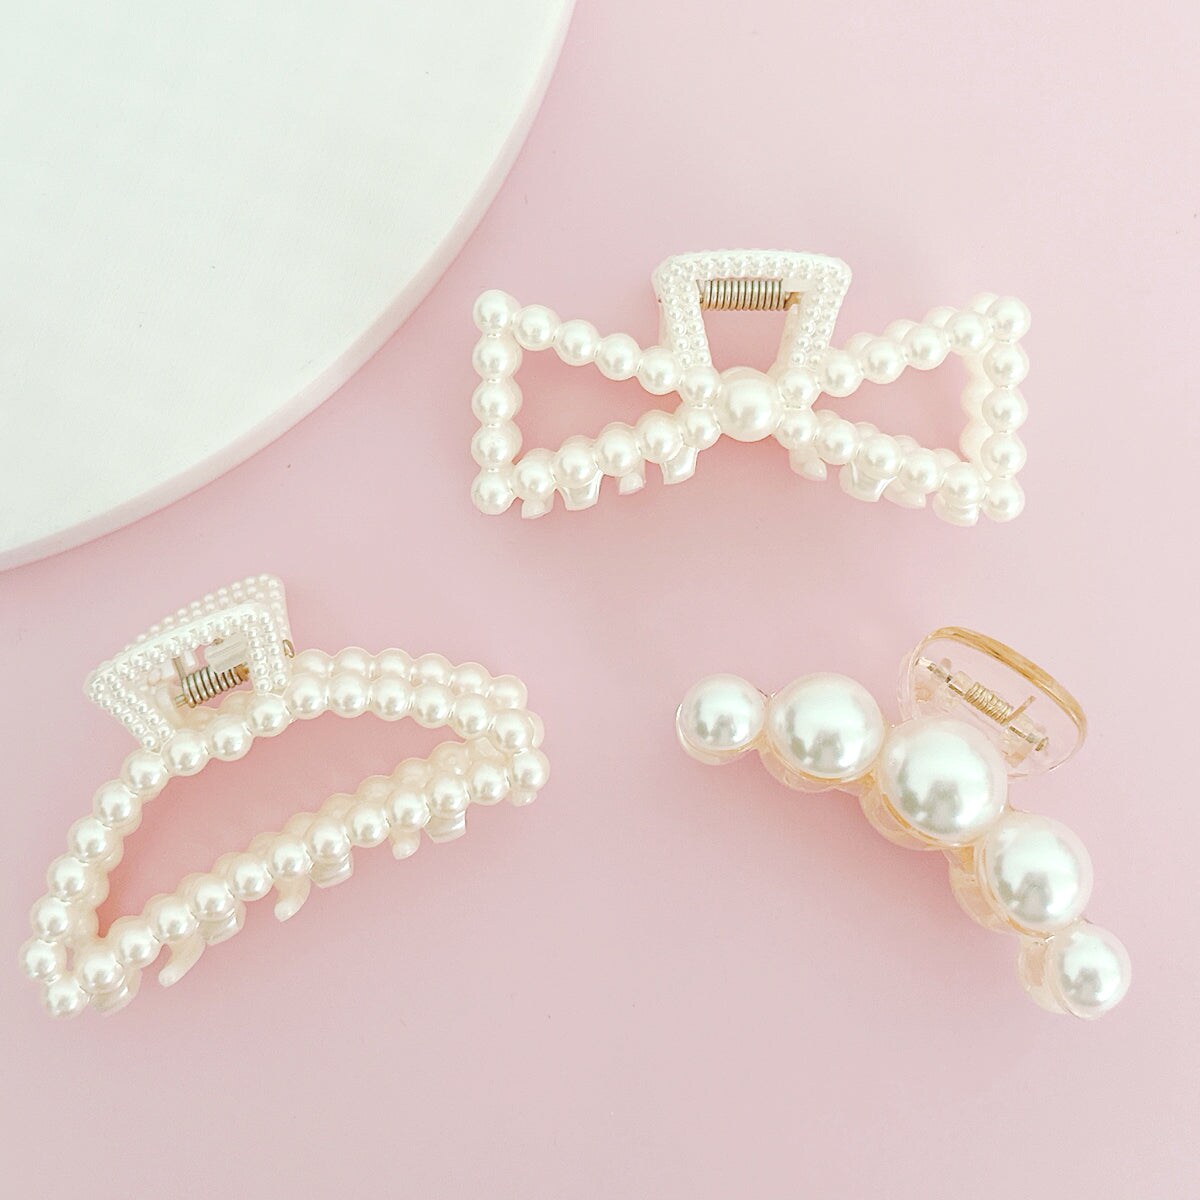 Wrapables Large Pearl Hair Claws Pearl Hair Clips Nonslip Jaw Clips Hair Styling (set of 3)